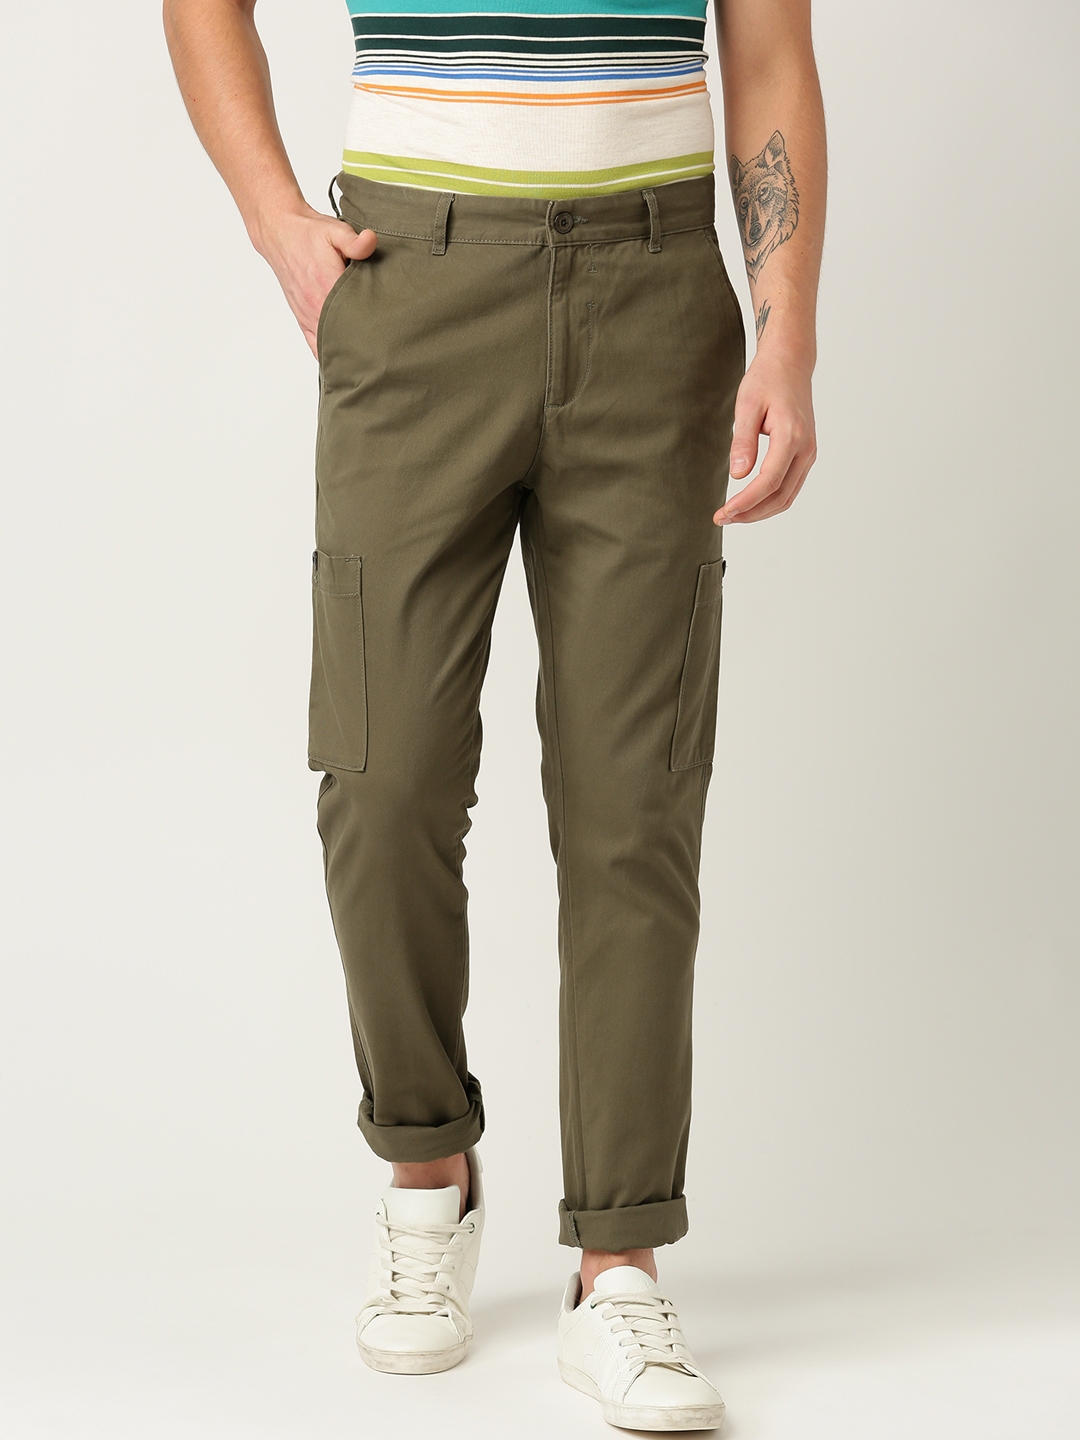 Buy United Colors Of Benetton Men Olive Green Slim Fit Solid Cargos ...